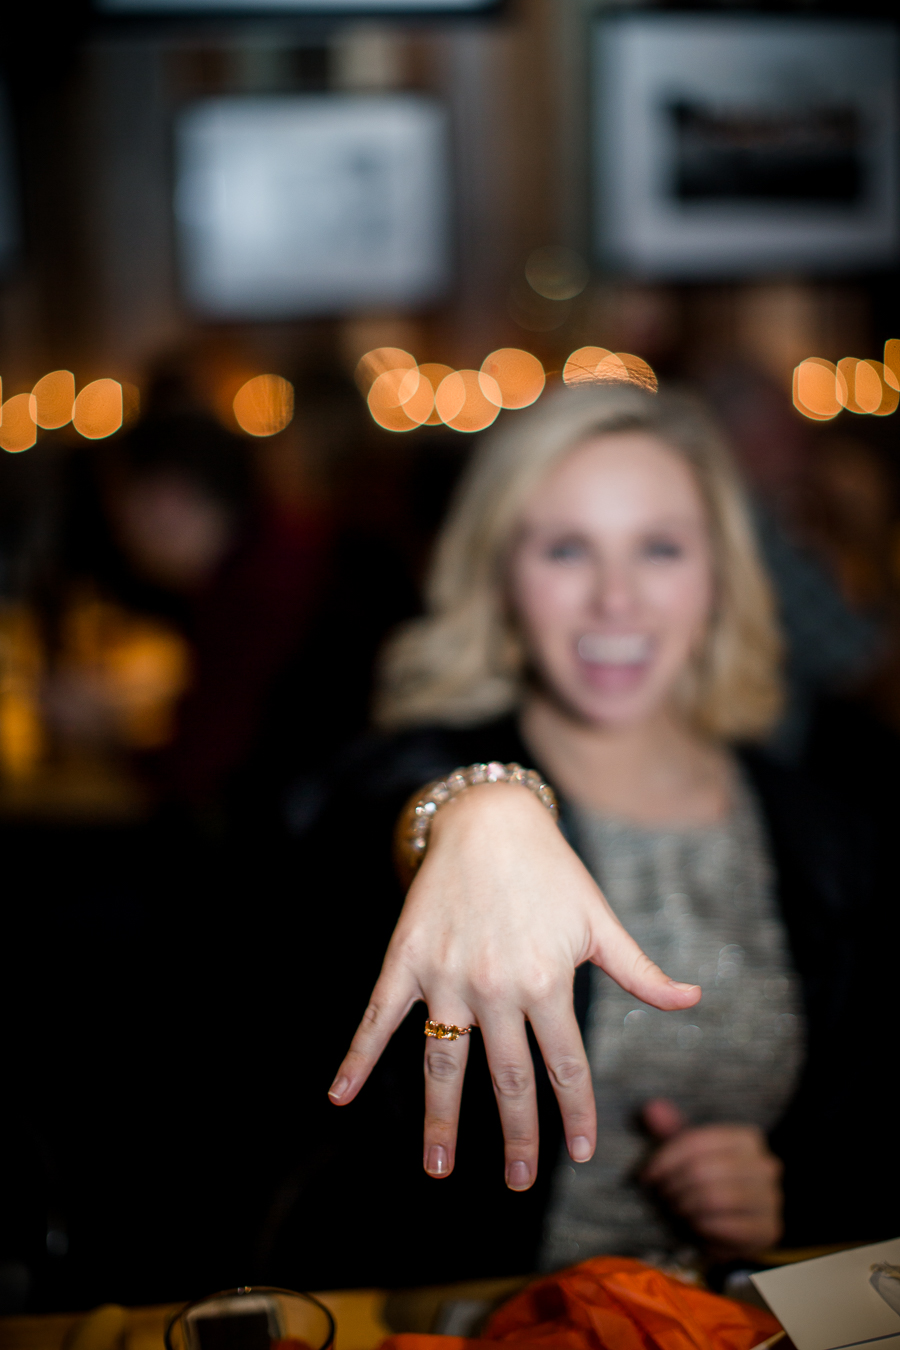 Showing the camera her graduation ring at this dinner at Sunspot after the University of Tennessee graduation by Amanda May Photos.